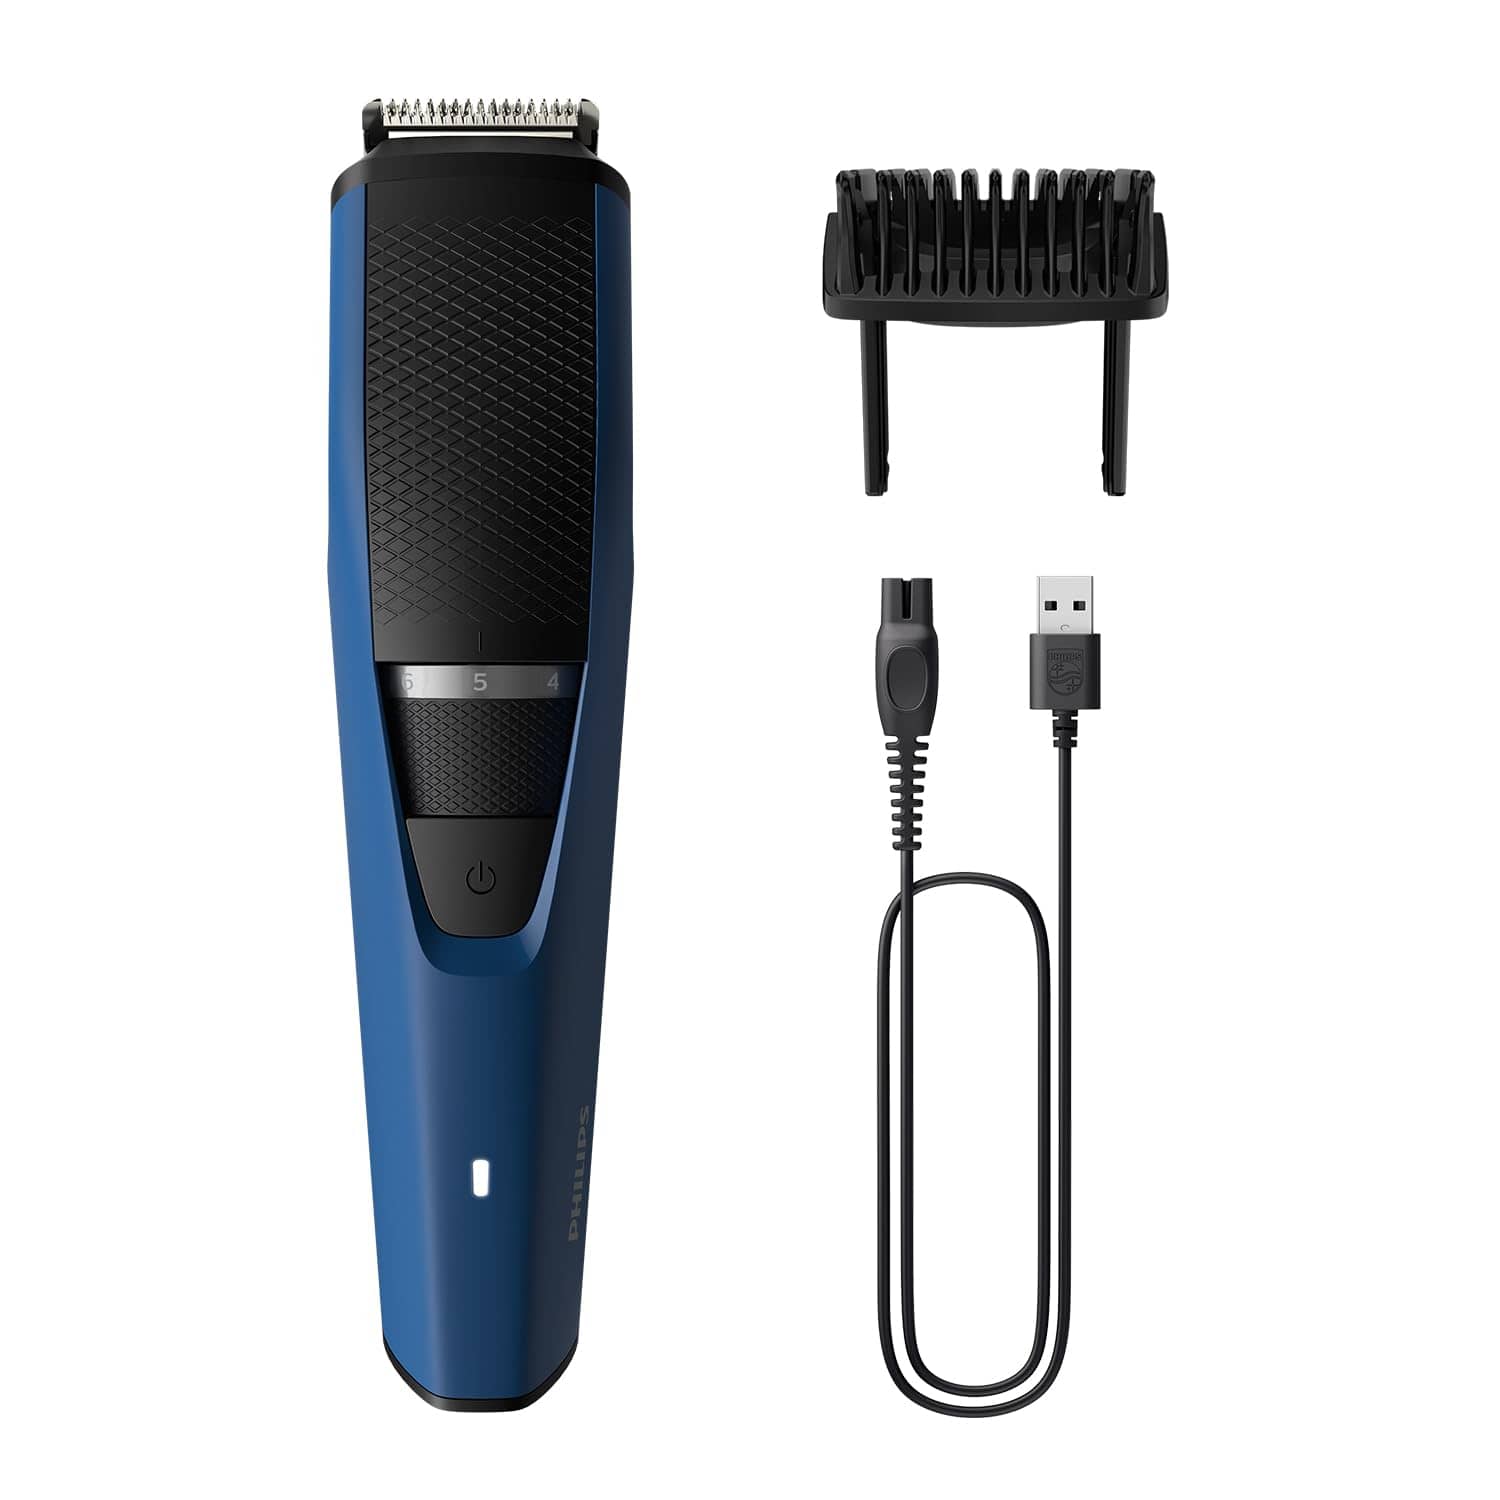 Philips Skin Friendly Beard Trimmer| 6x longer battery life| 10 length settings| 15mins quick charge| Self Sharpening Blades | Cordless & Rechargeable| New Model – BT3303/30